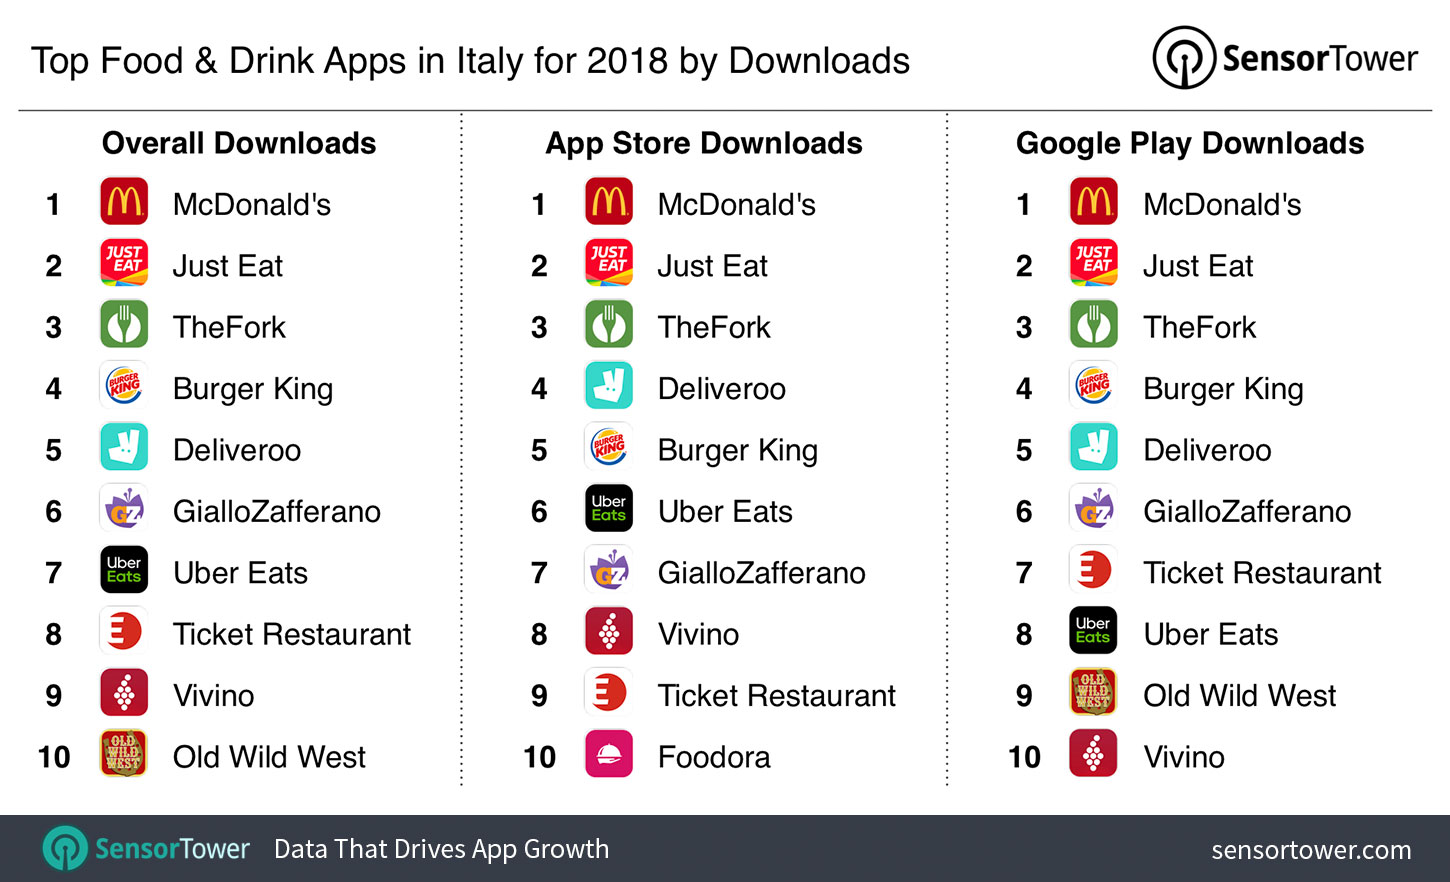 Top Food & Drink Apps in Italy for 2018 by Downloads